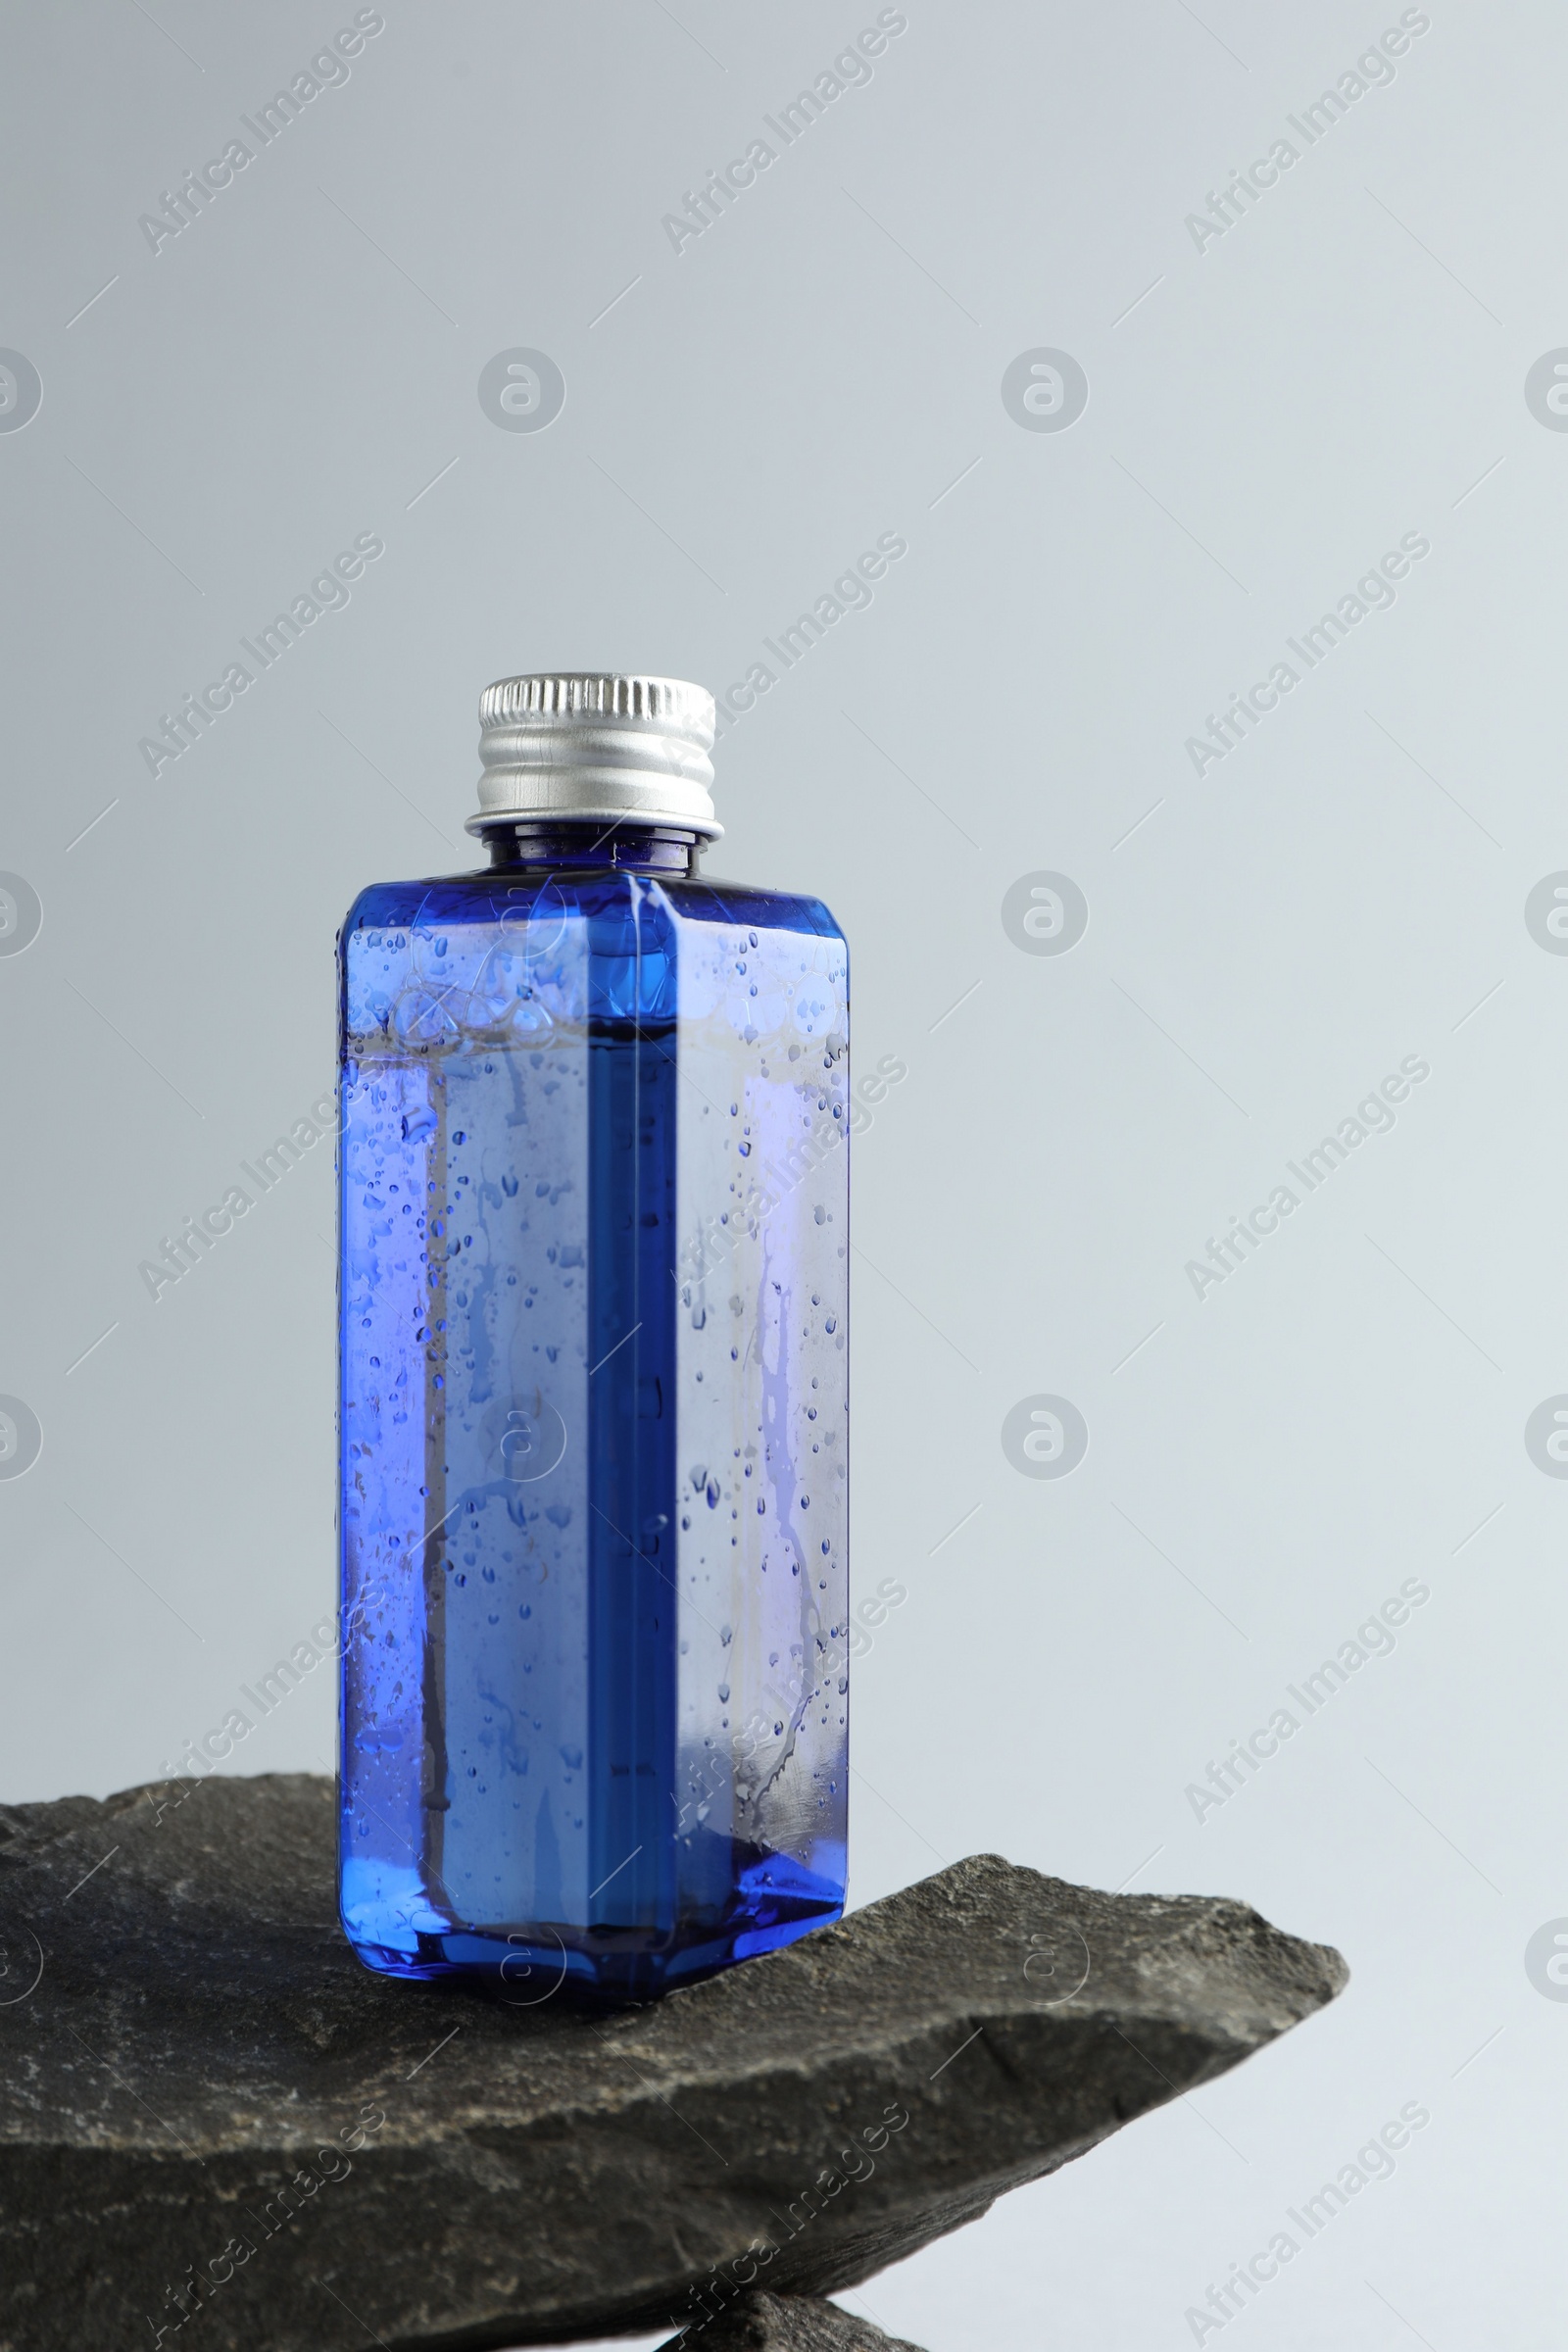 Photo of Bottle of cosmetic product on stone against light grey background, space for text